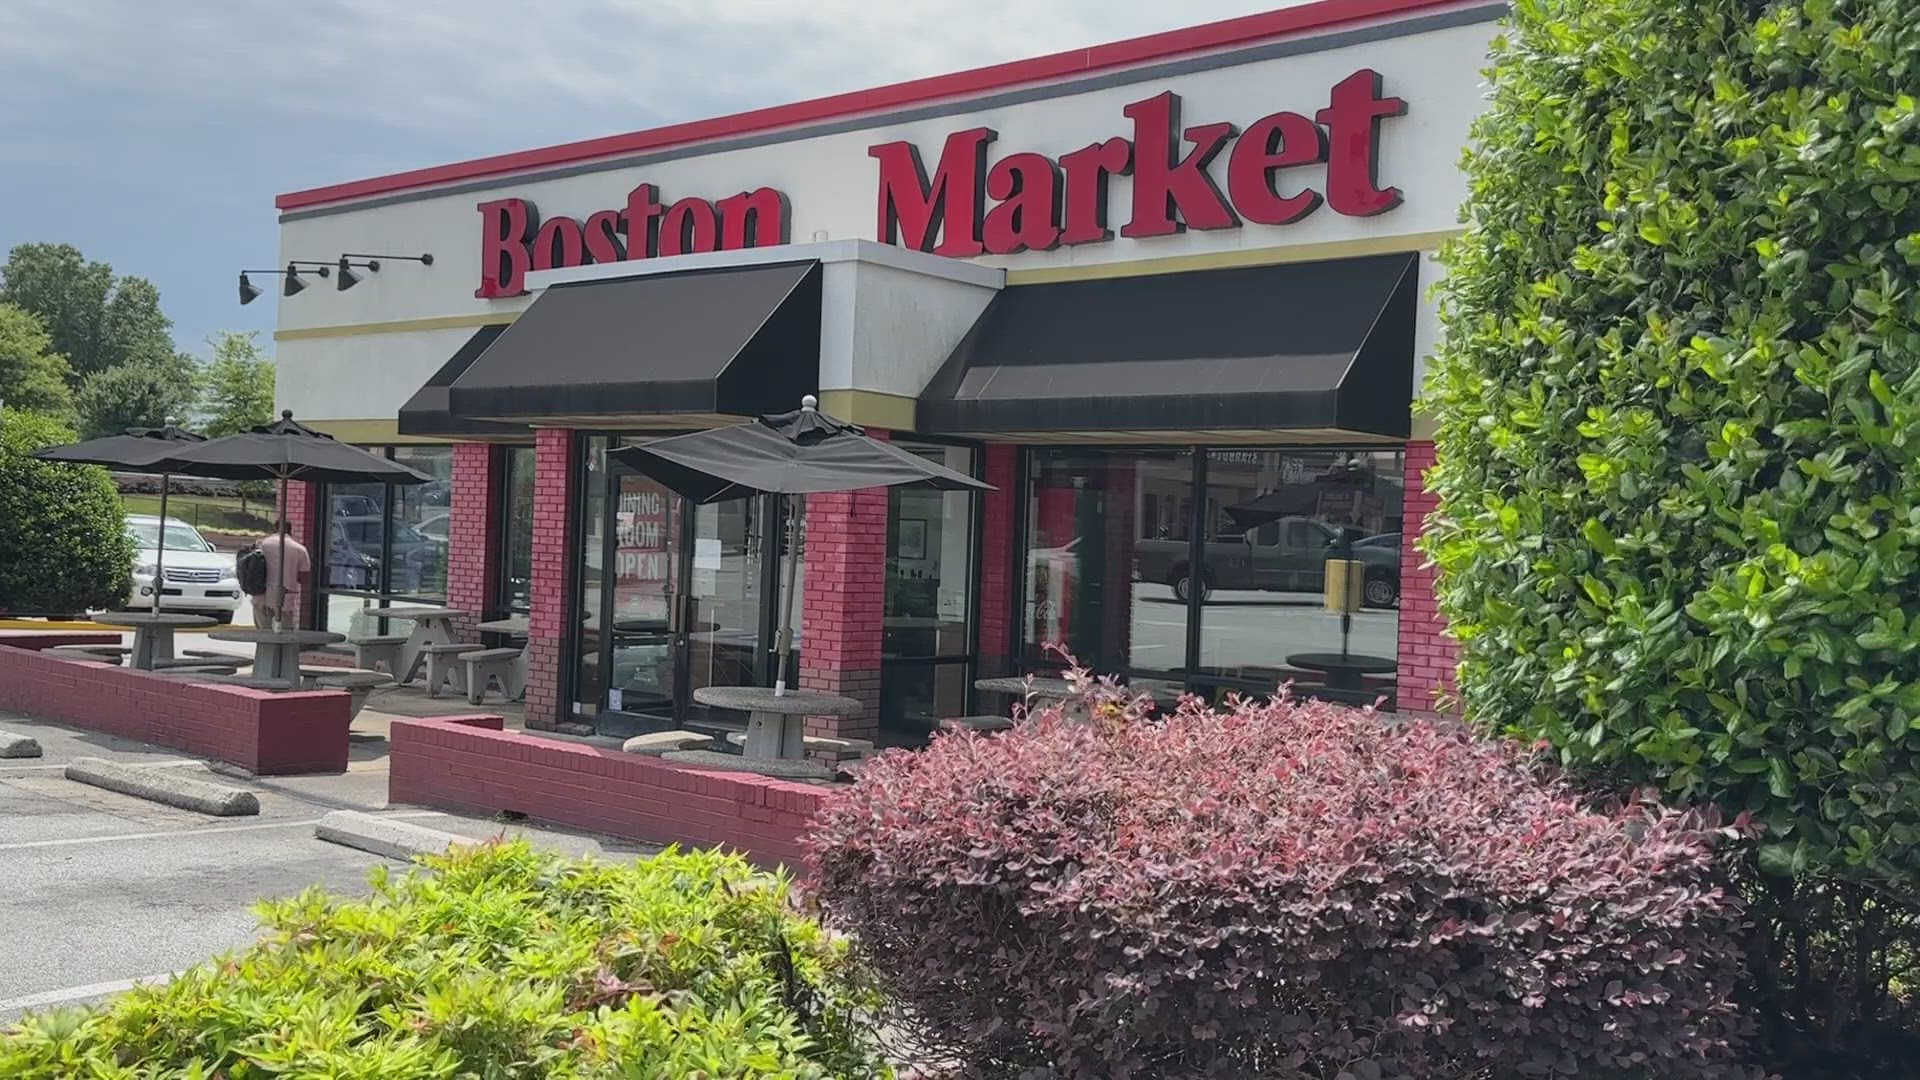 After weeks of pay and inventory issues, Boston Market closes